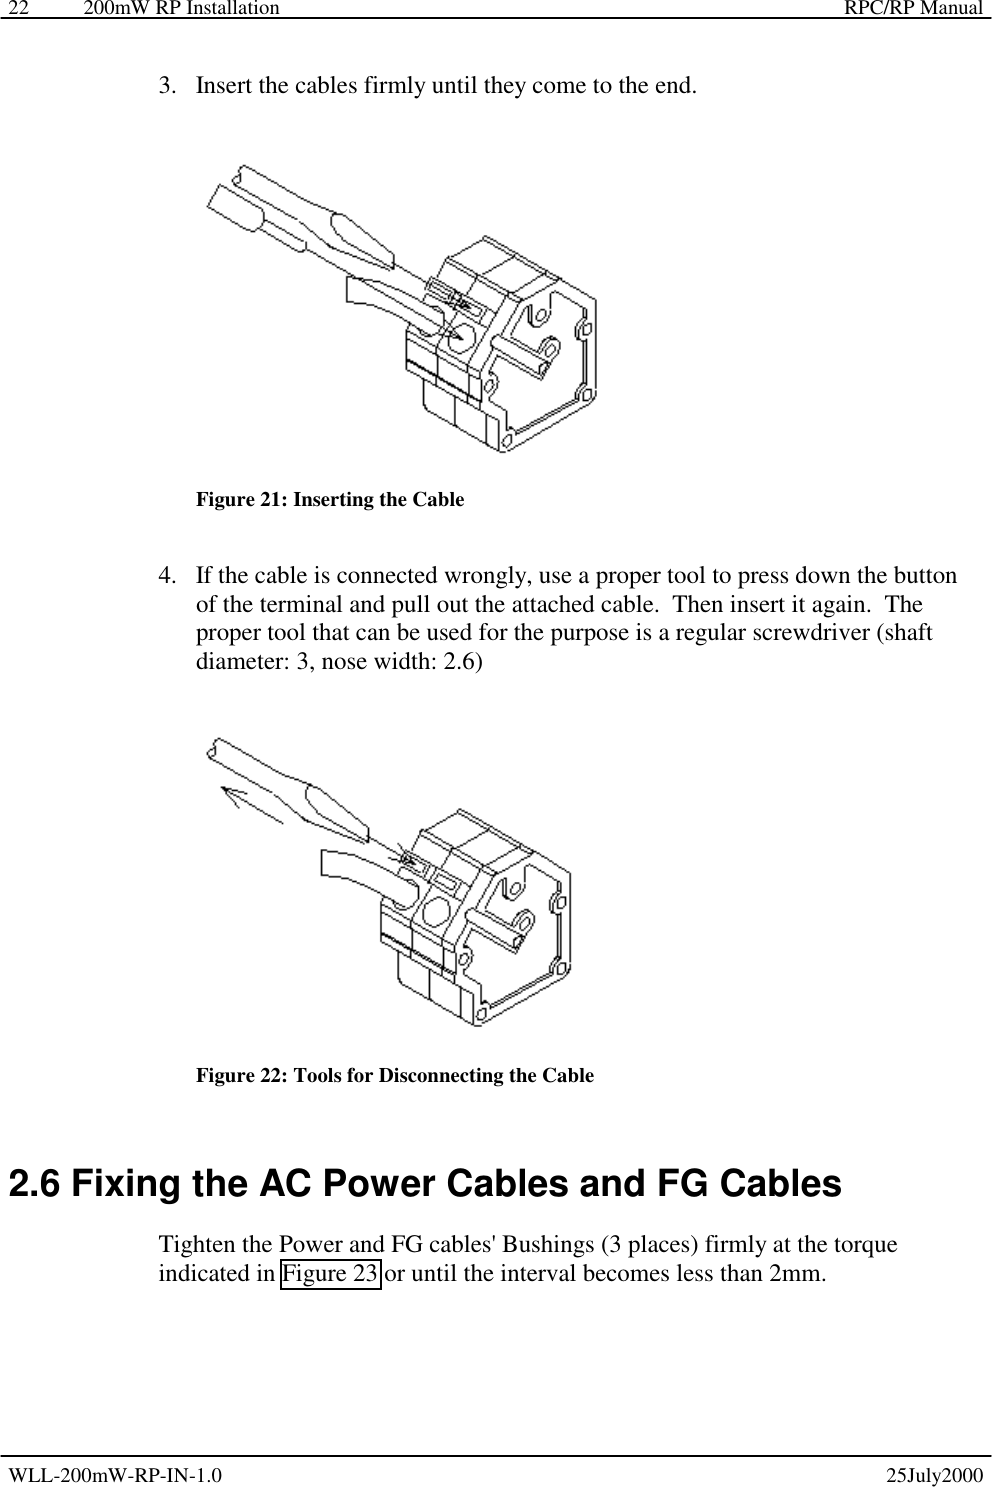 200mW RP Installation    RPC/RP Manual WLL-200mW-RP-IN-1.0   25July2000 22 3.  Insert the cables firmly until they come to the end.  Figure 21: Inserting the Cable 4.  If the cable is connected wrongly, use a proper tool to press down the button of the terminal and pull out the attached cable.  Then insert it again.  The proper tool that can be used for the purpose is a regular screwdriver (shaft diameter: 3, nose width: 2.6)  Figure 22: Tools for Disconnecting the Cable 2.6 Fixing the AC Power Cables and FG Cables Tighten the Power and FG cables&apos; Bushings (3 places) firmly at the torque indicated in Figure 23 or until the interval becomes less than 2mm. 